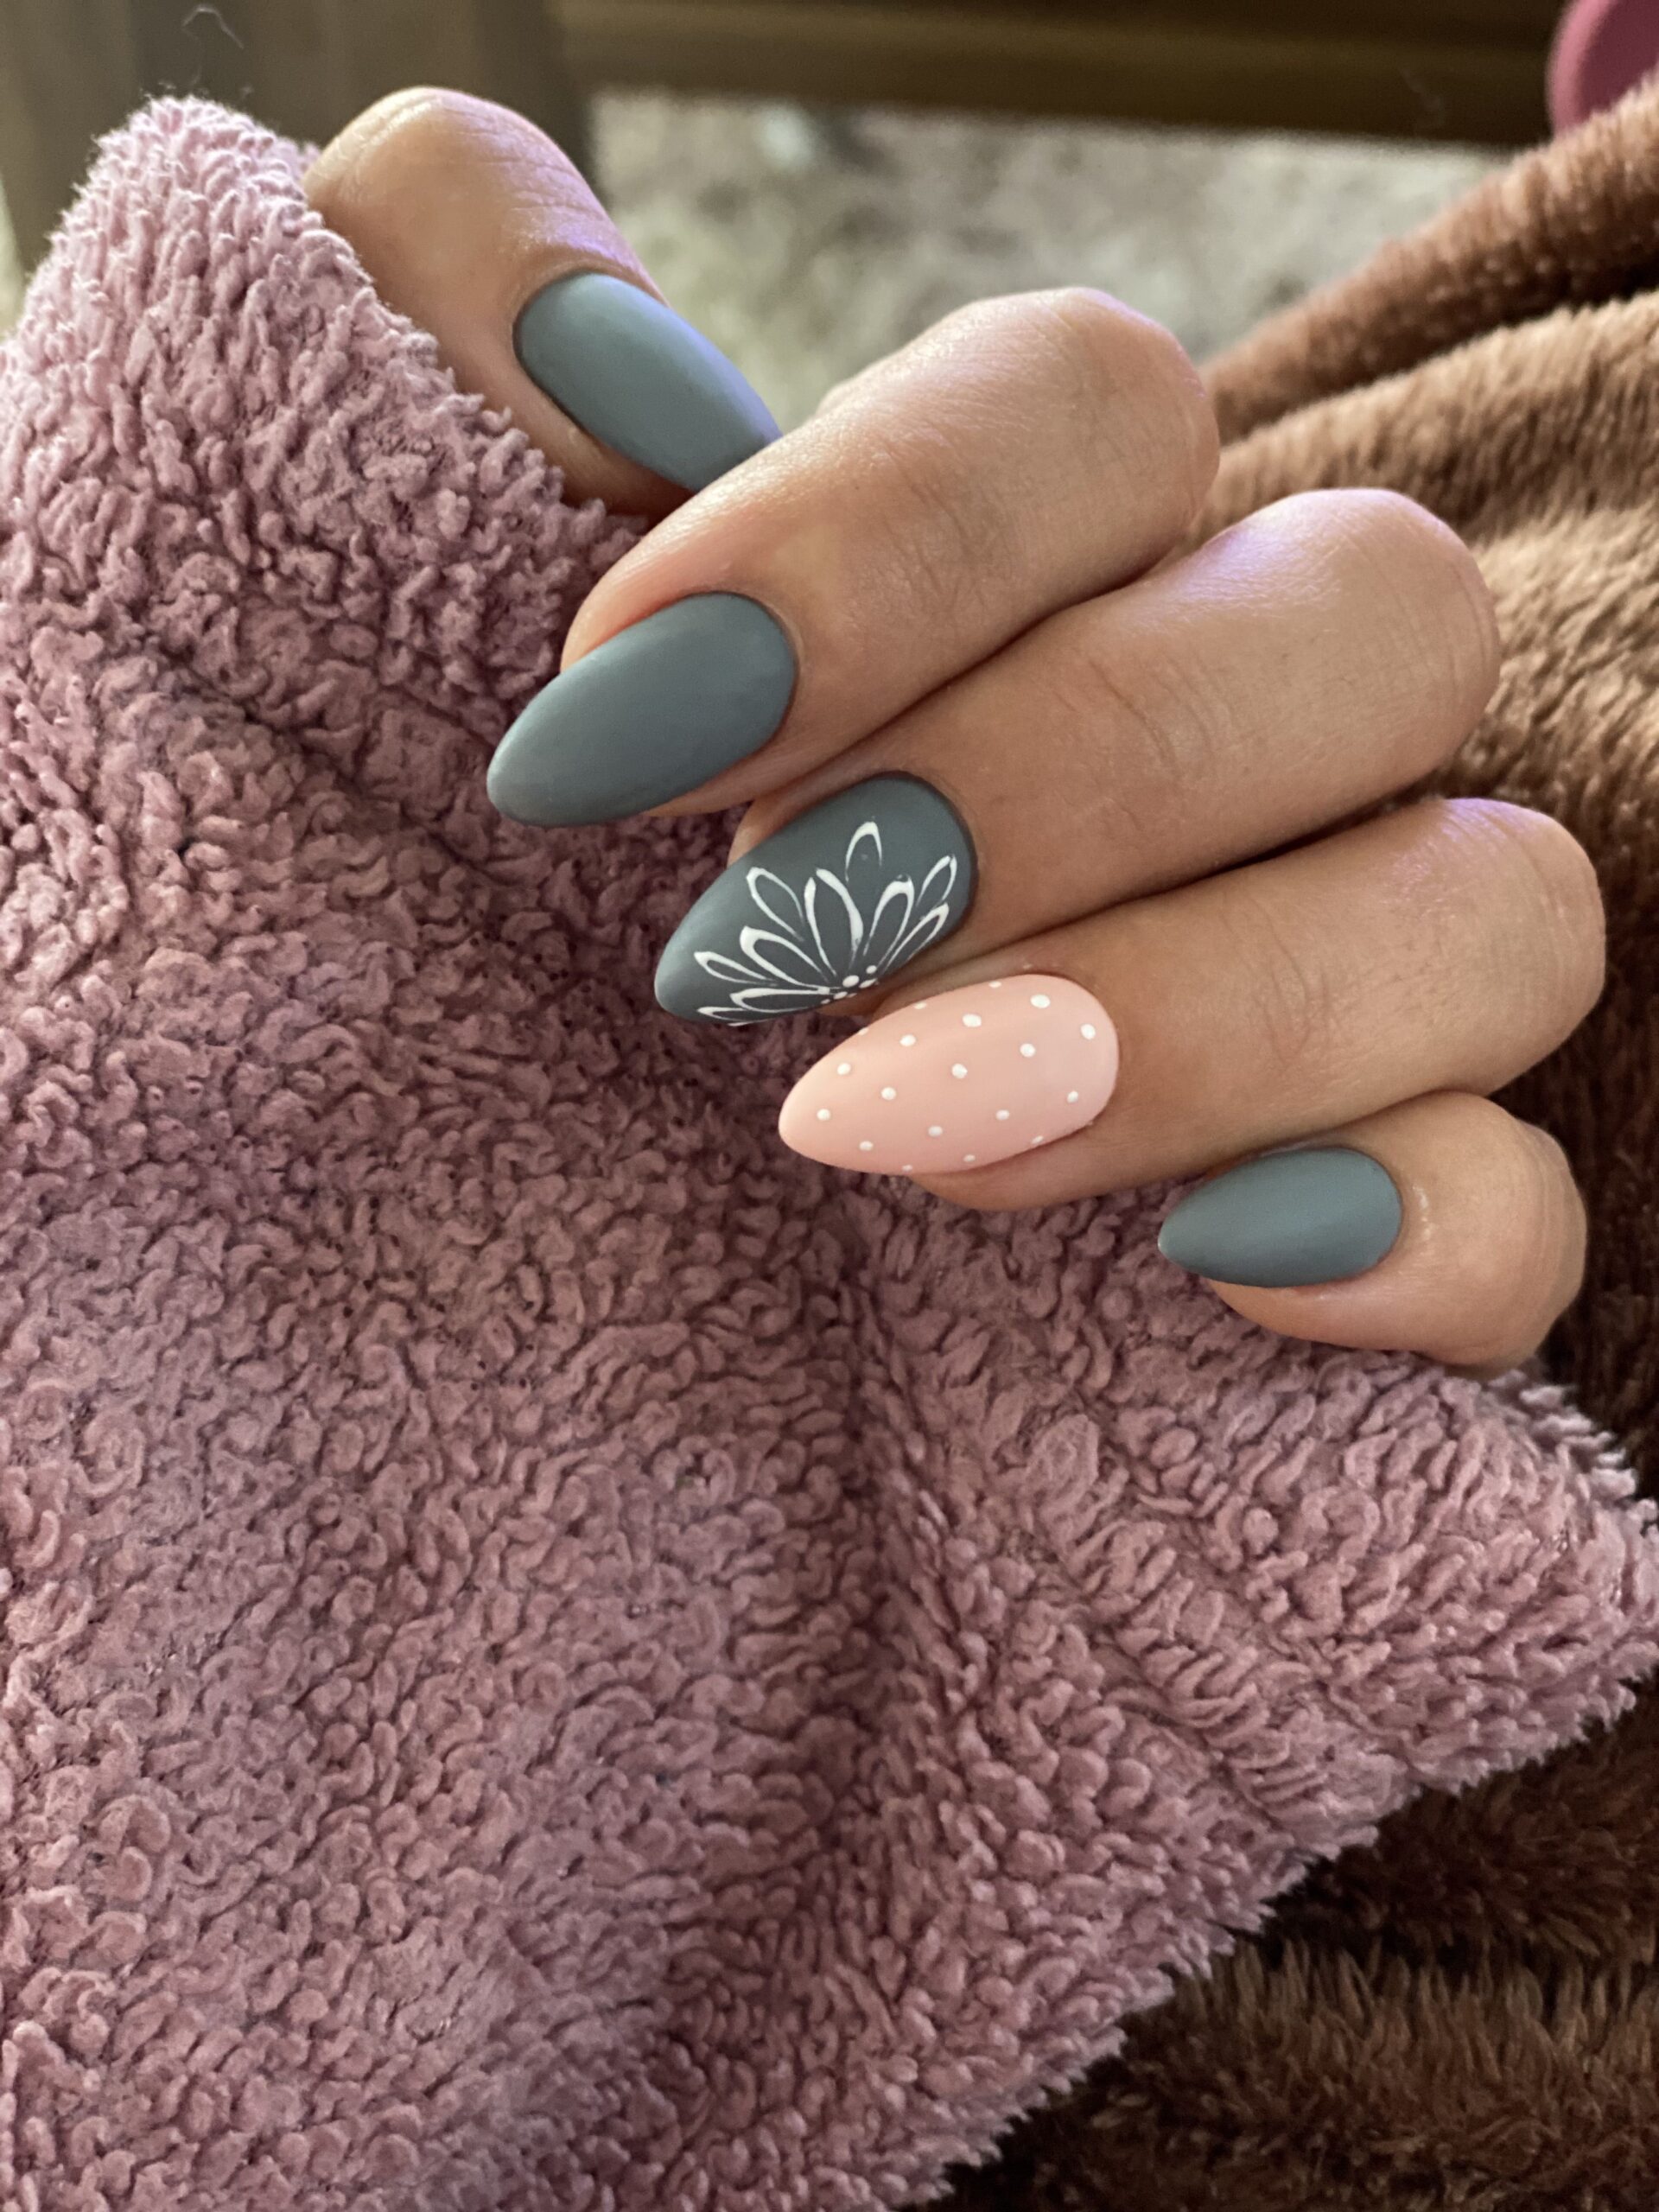 Elegant Matte Nail Designs for a Chic
Look